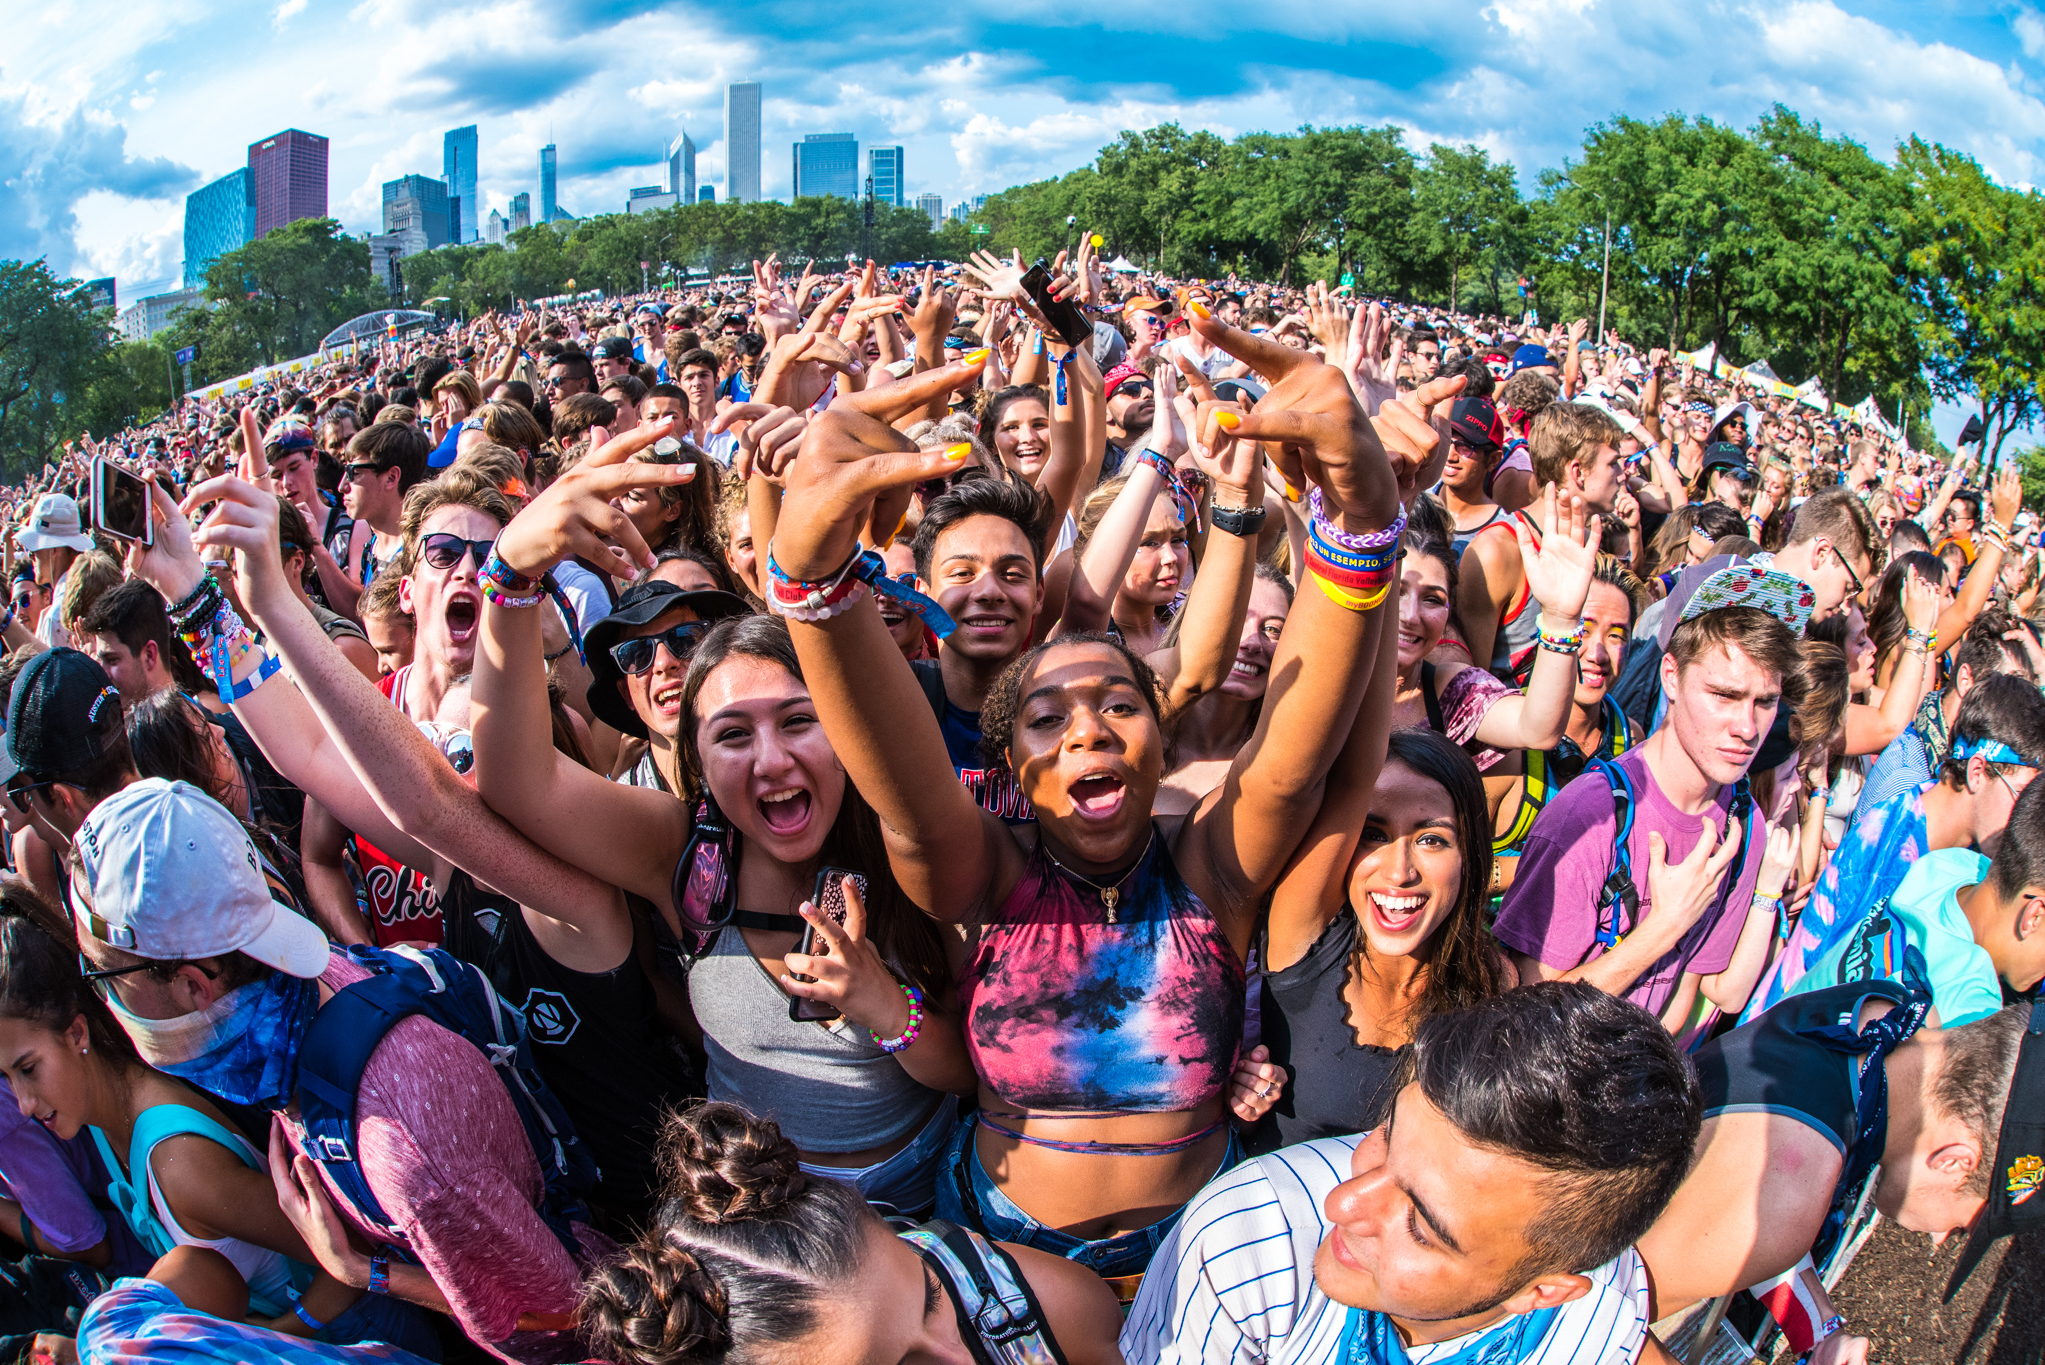 Lollapalooza tickets go on sale next Tuesday, March 20